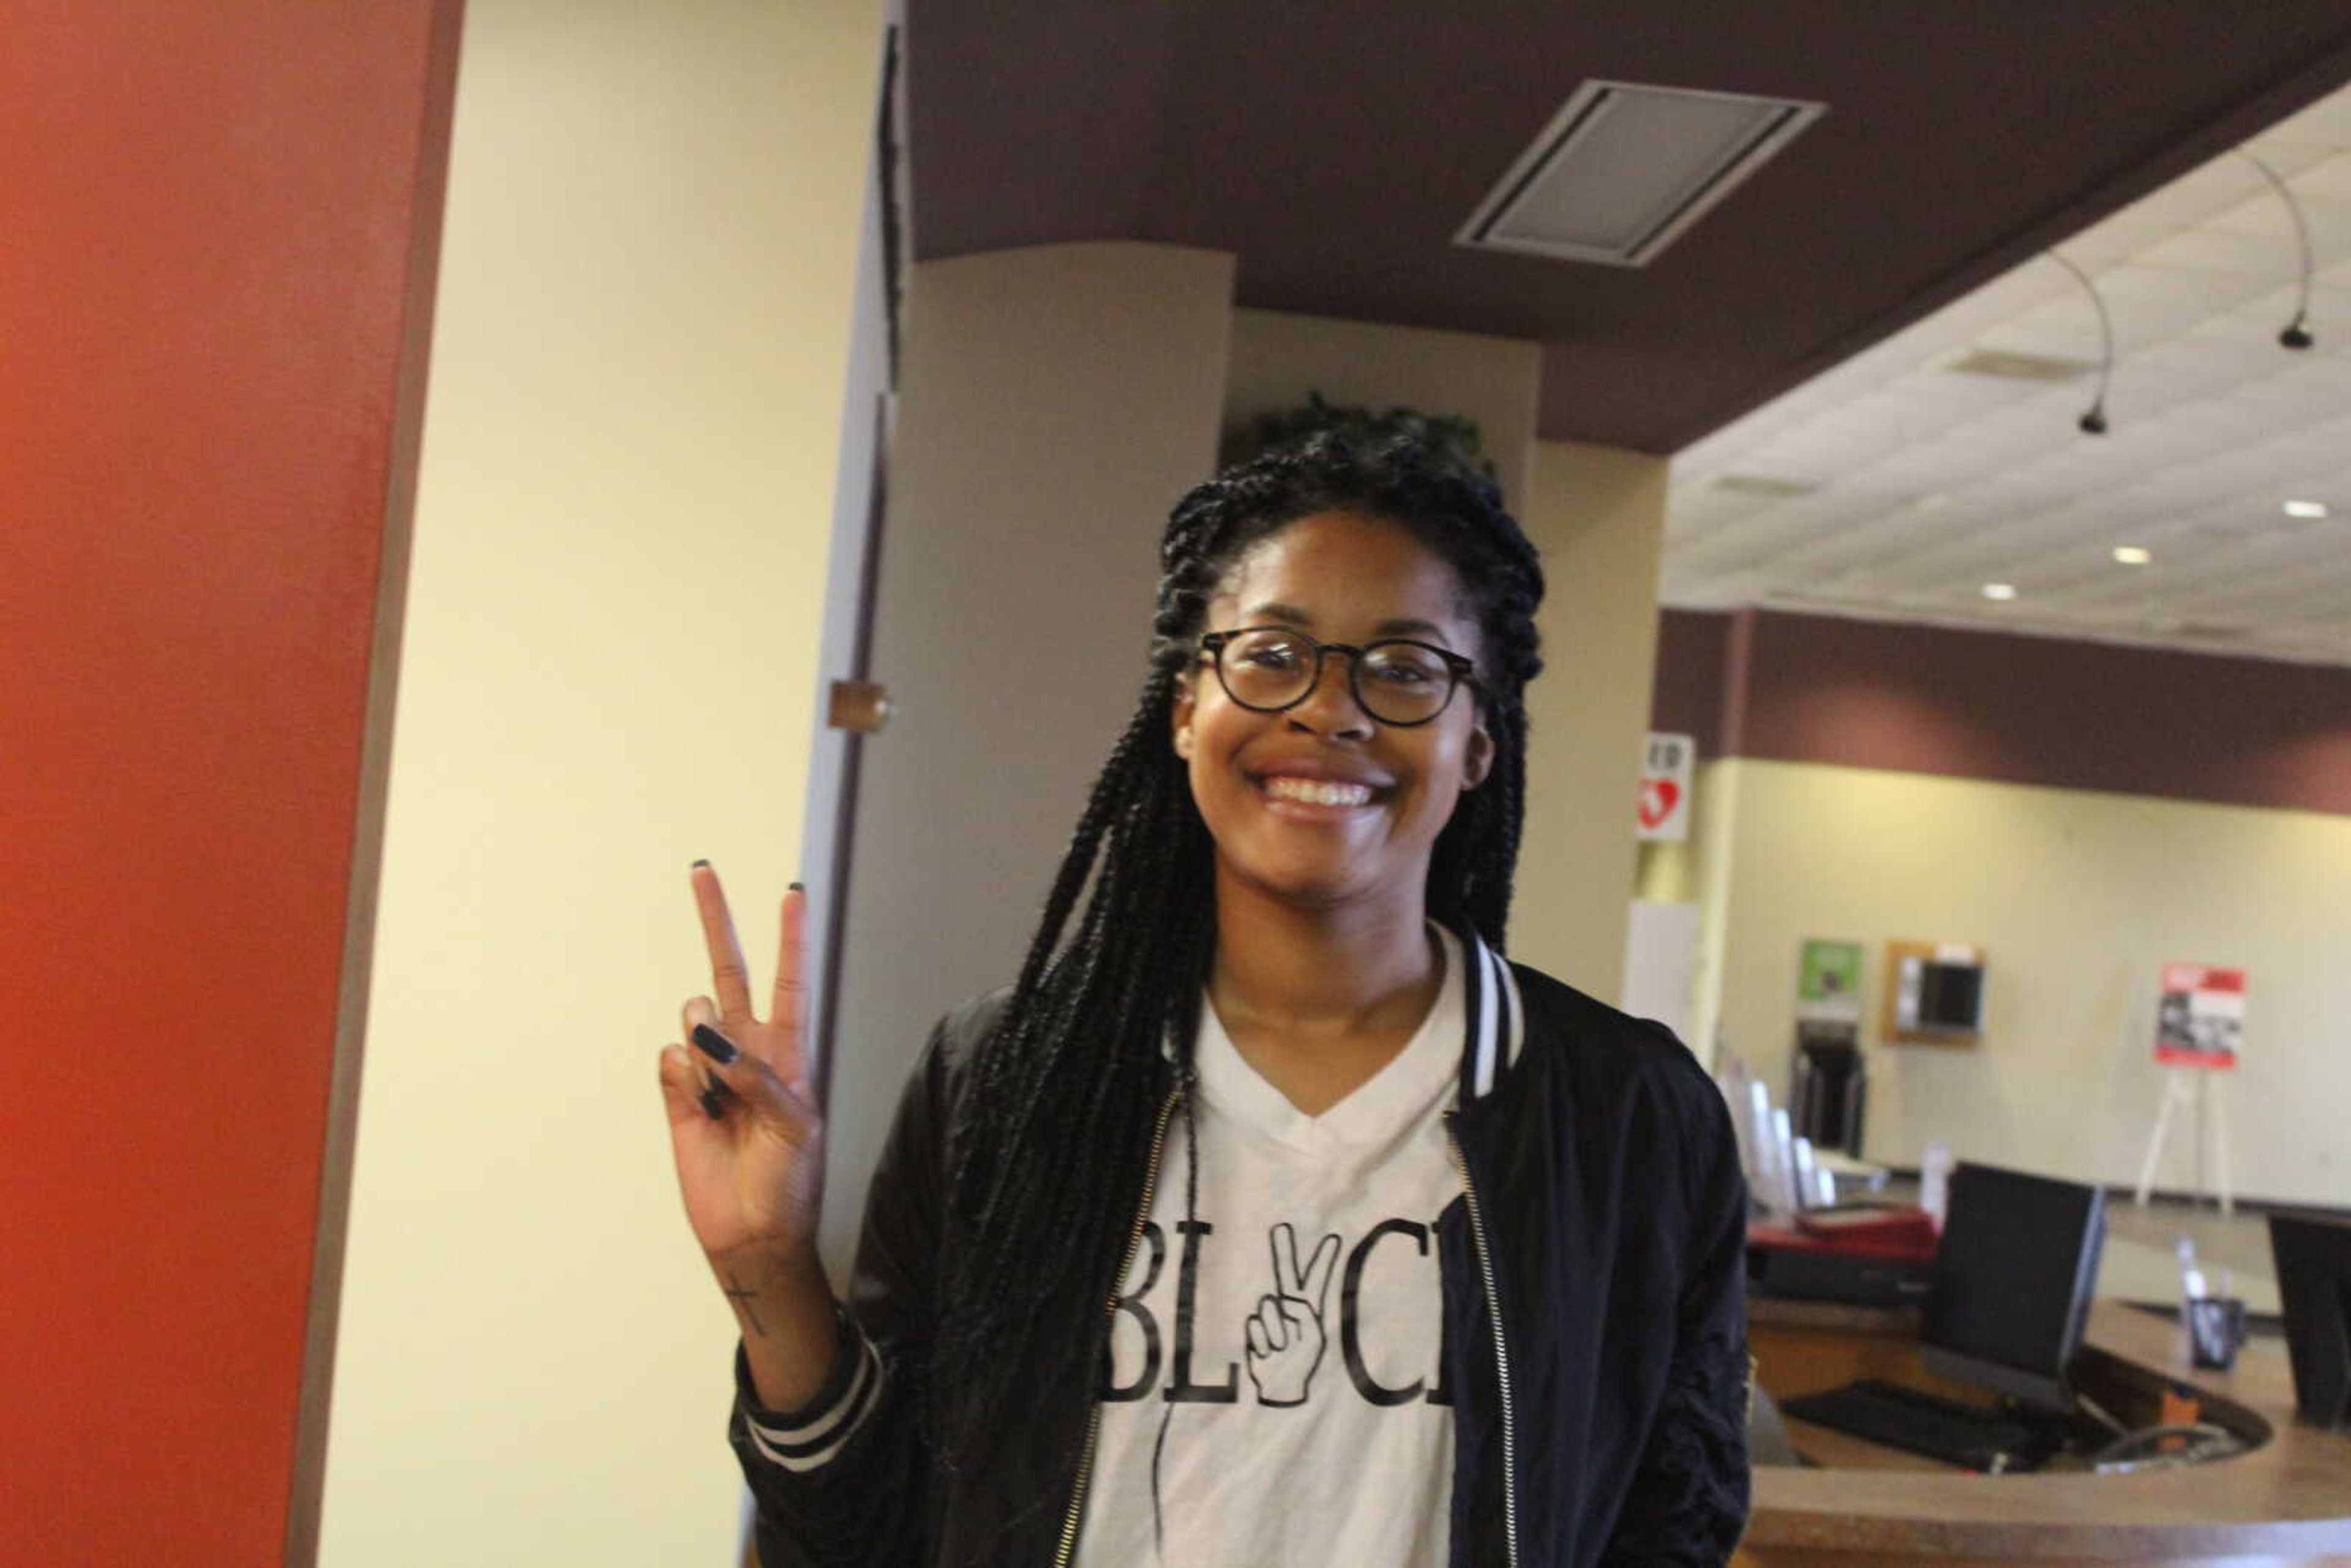 Nyara Williams, a senior at Southeast Missouri State University created Black.Clothing after the killing of Michael Brown as a way to get involved with the movement.